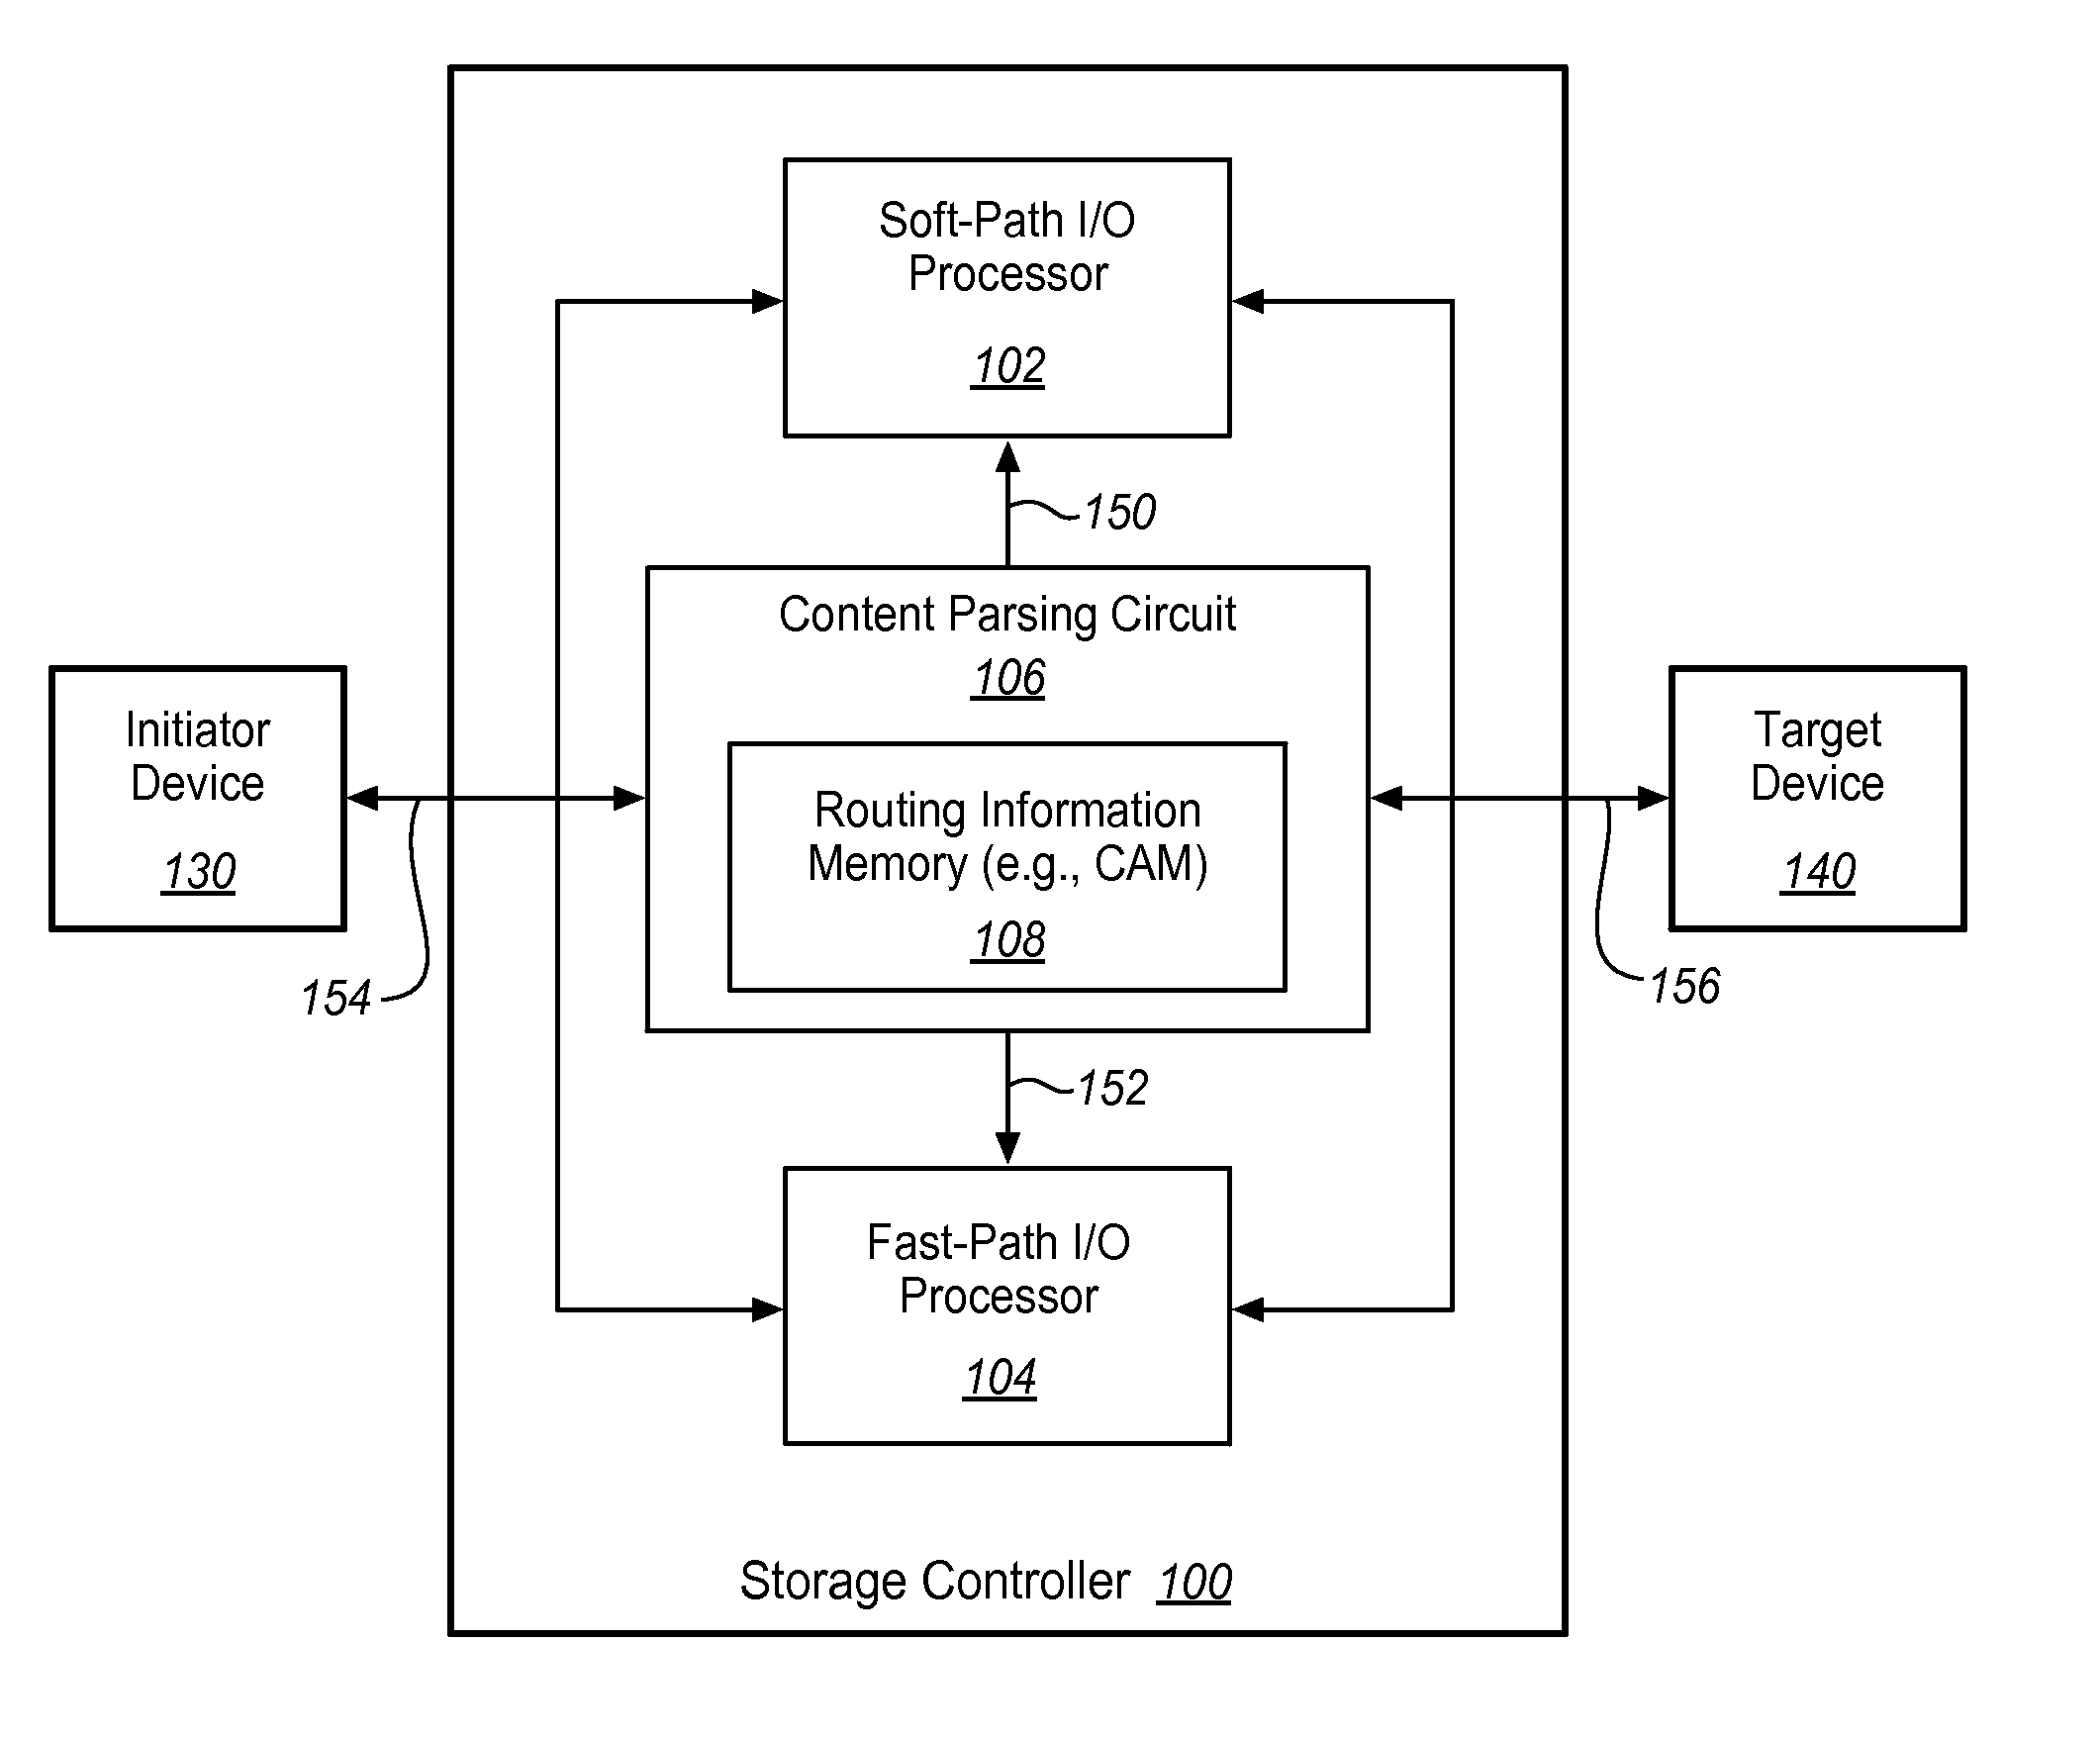 Apparatus and methods for real-time routing of received commands in a split-path architecture storage controller